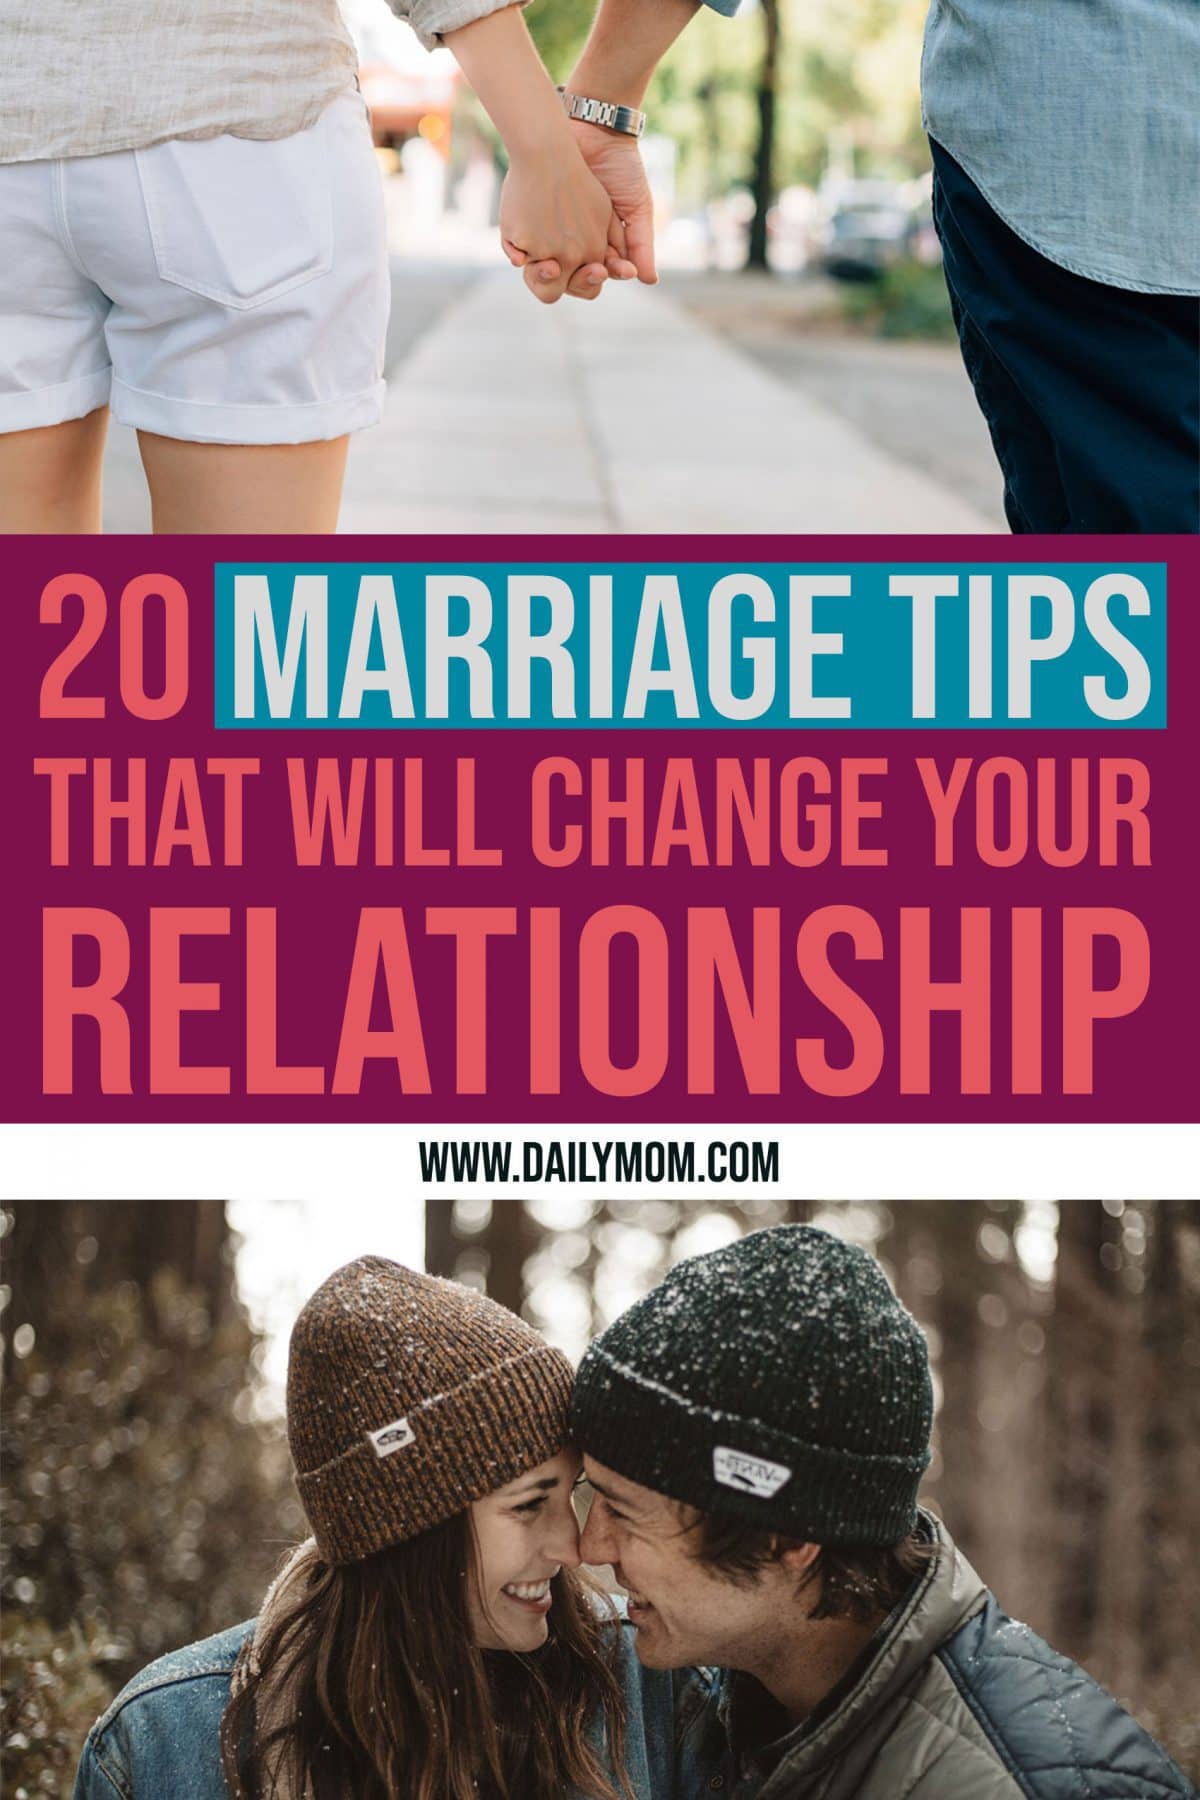 20 Marriage Tips That Will Change Your Relationship